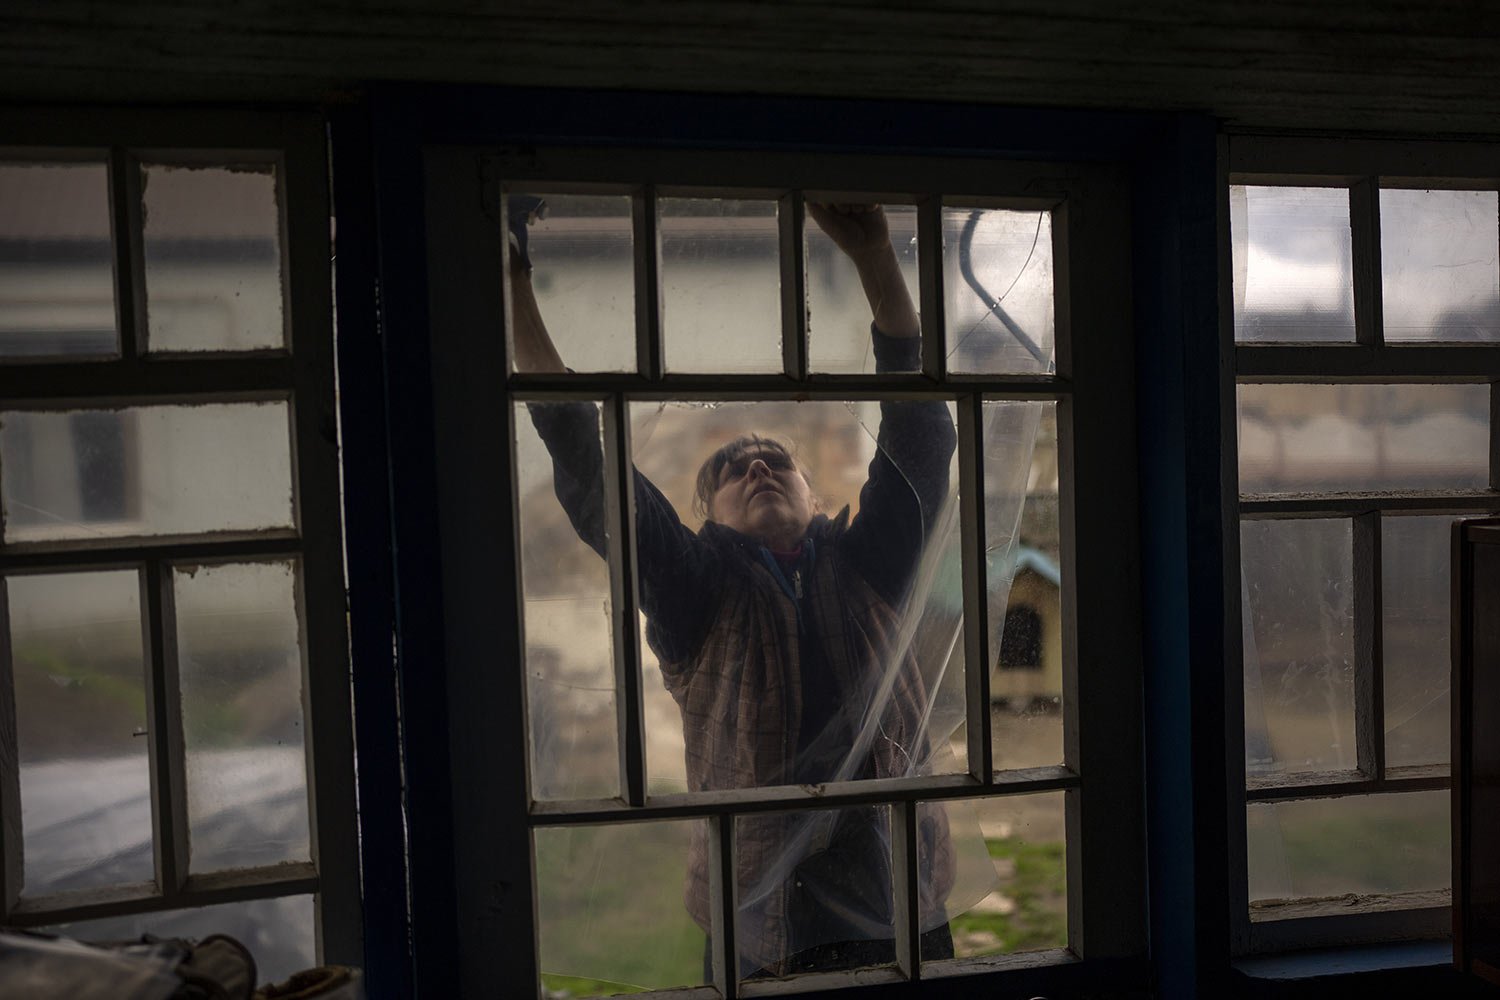  Tetyana Boikiv, 52, puts plastic sheeting on the windows of her home that were broken by explosions during the Russian invasion of her neighborhood in Ozera village near Bucha, Ukraine, Tuesday, April 26, 2022. Tetyana buried her husband Moroz Mykol